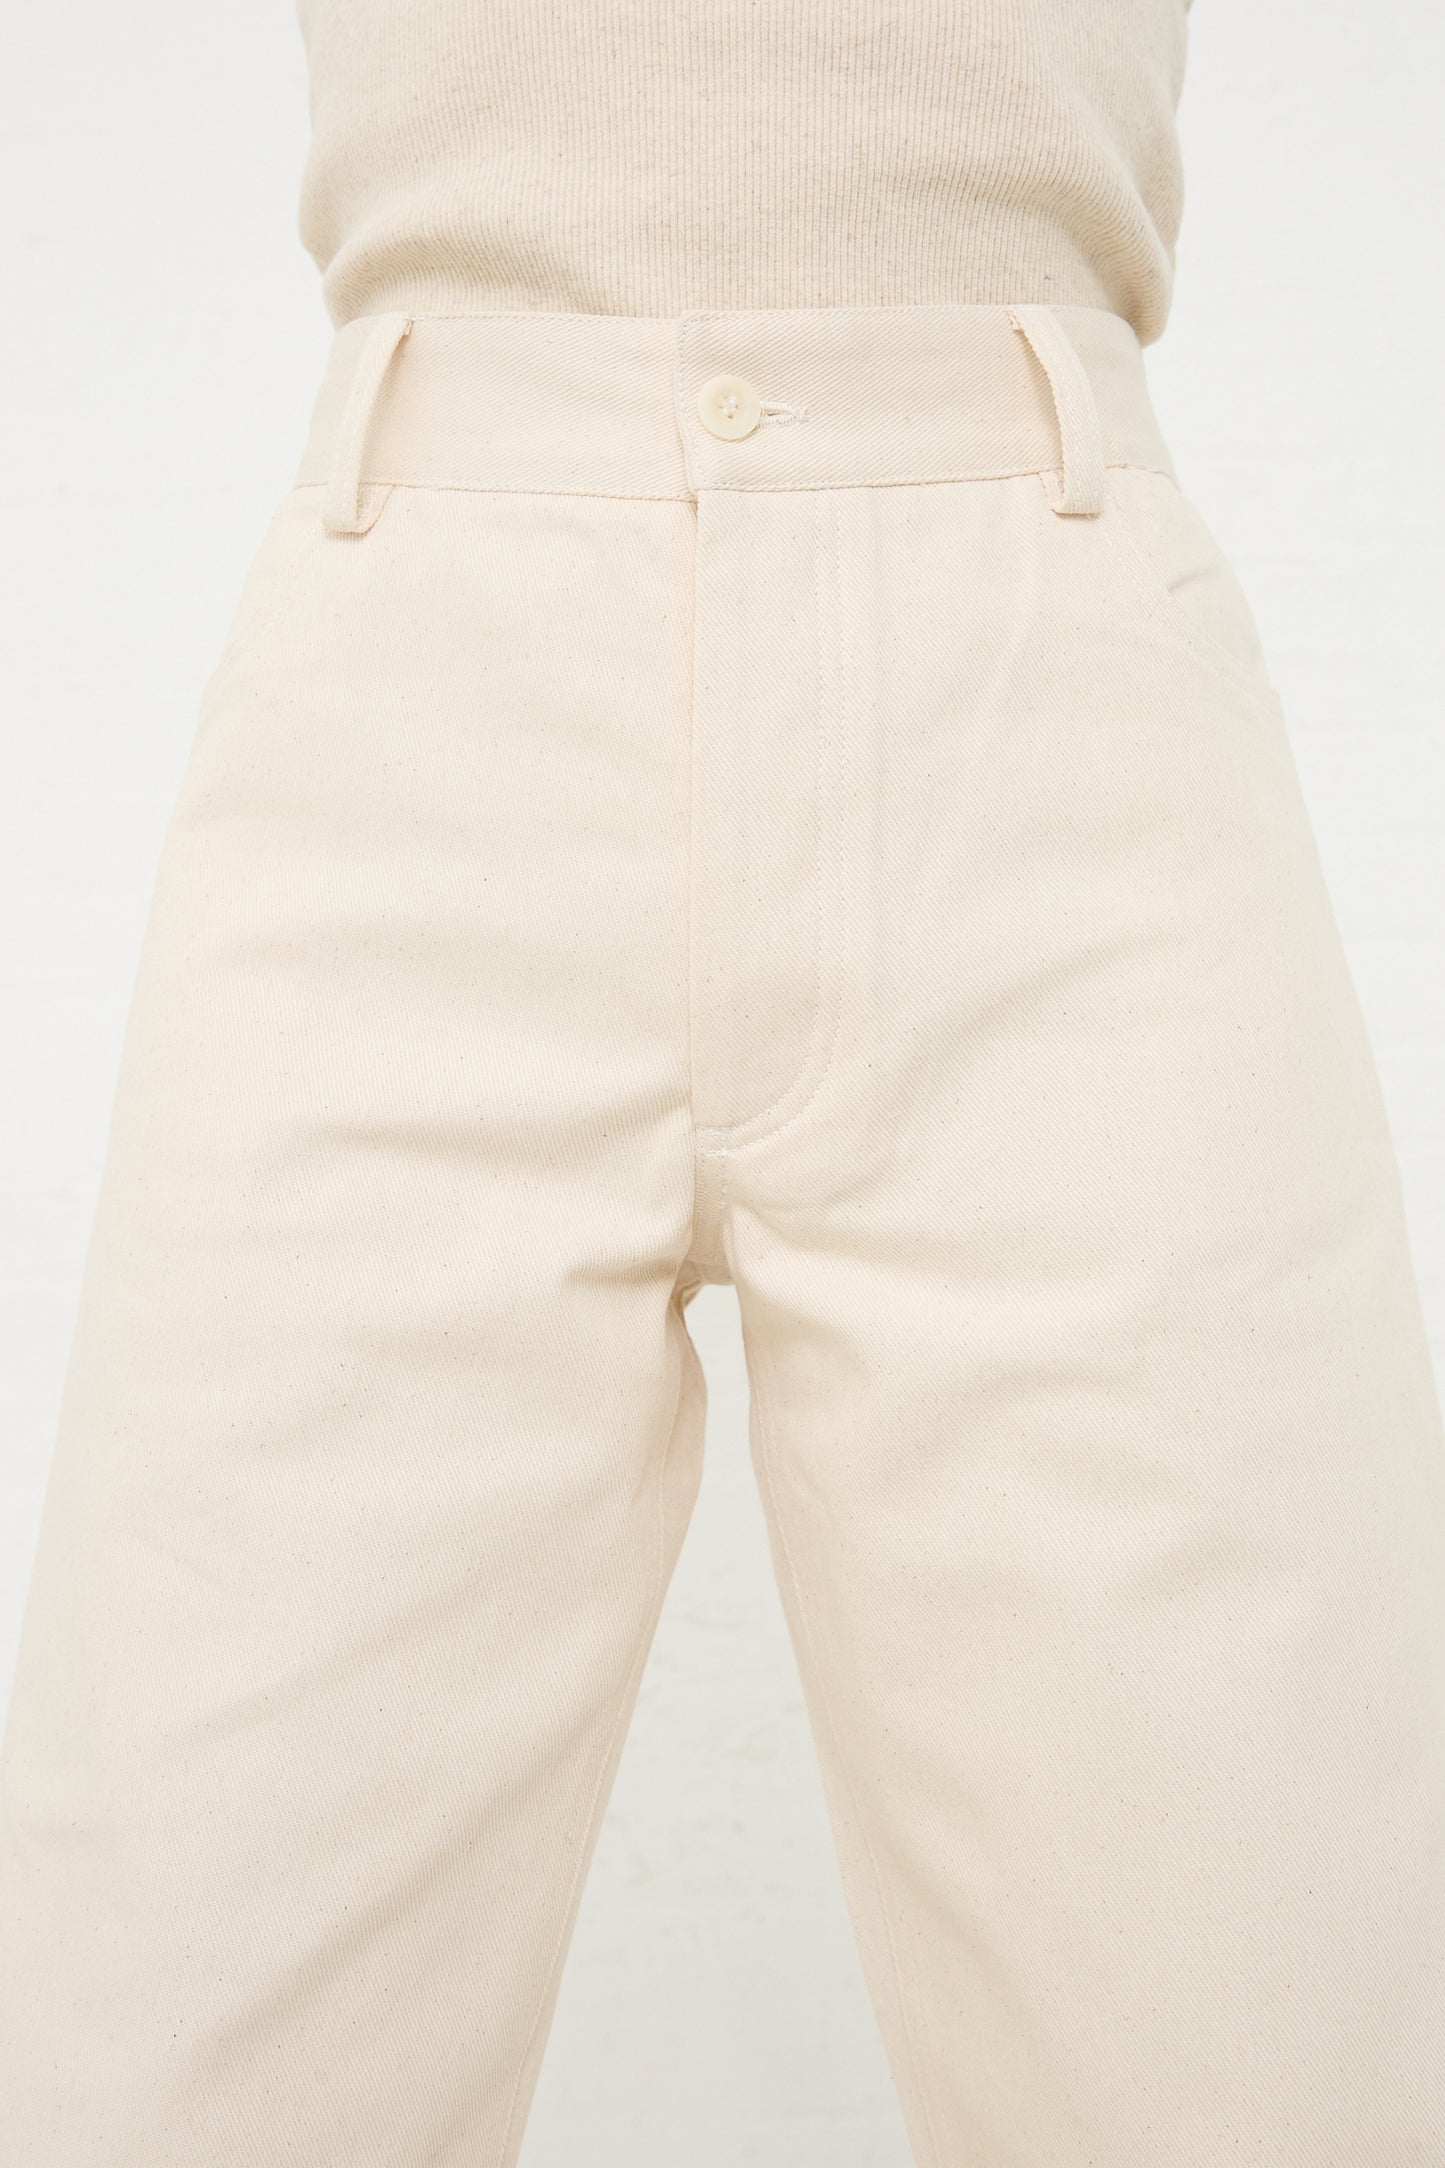 Close-up of a person wearing Baserange's Organic Cotton Indre Pant in Undyed with a button closure and tucked-in sweater, viewed from the front waist down.